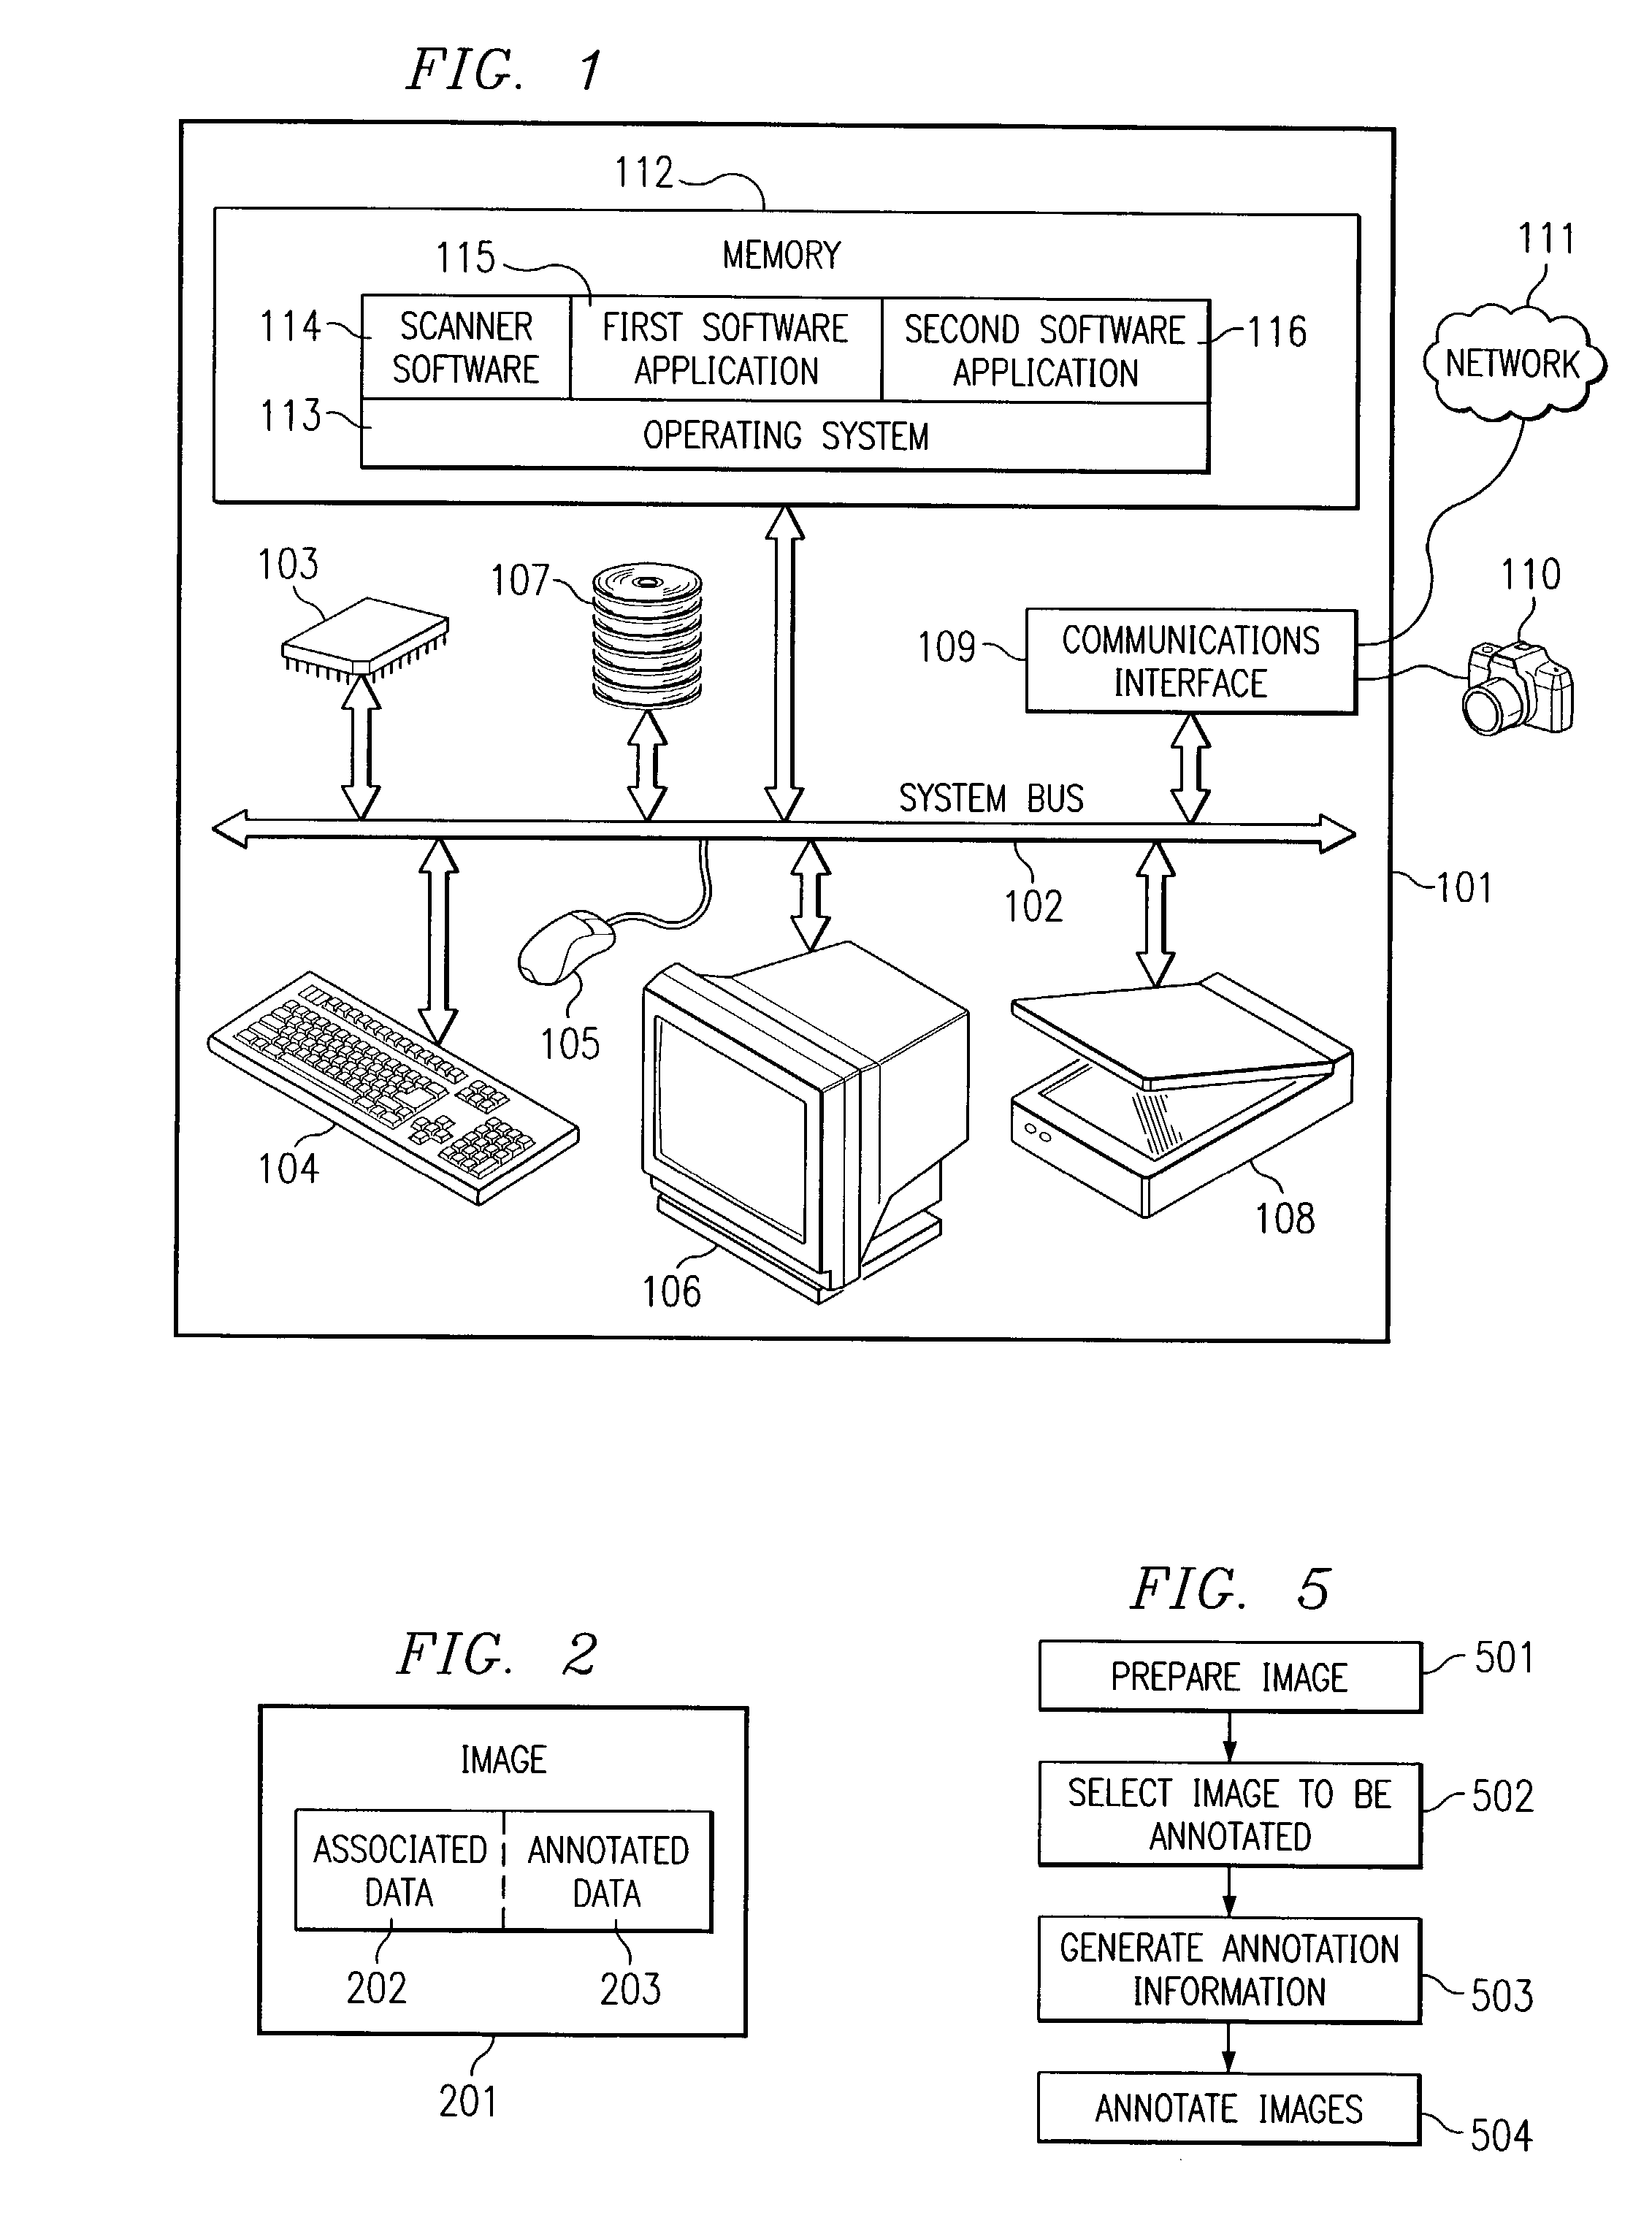 System for and method of generating image annotation information